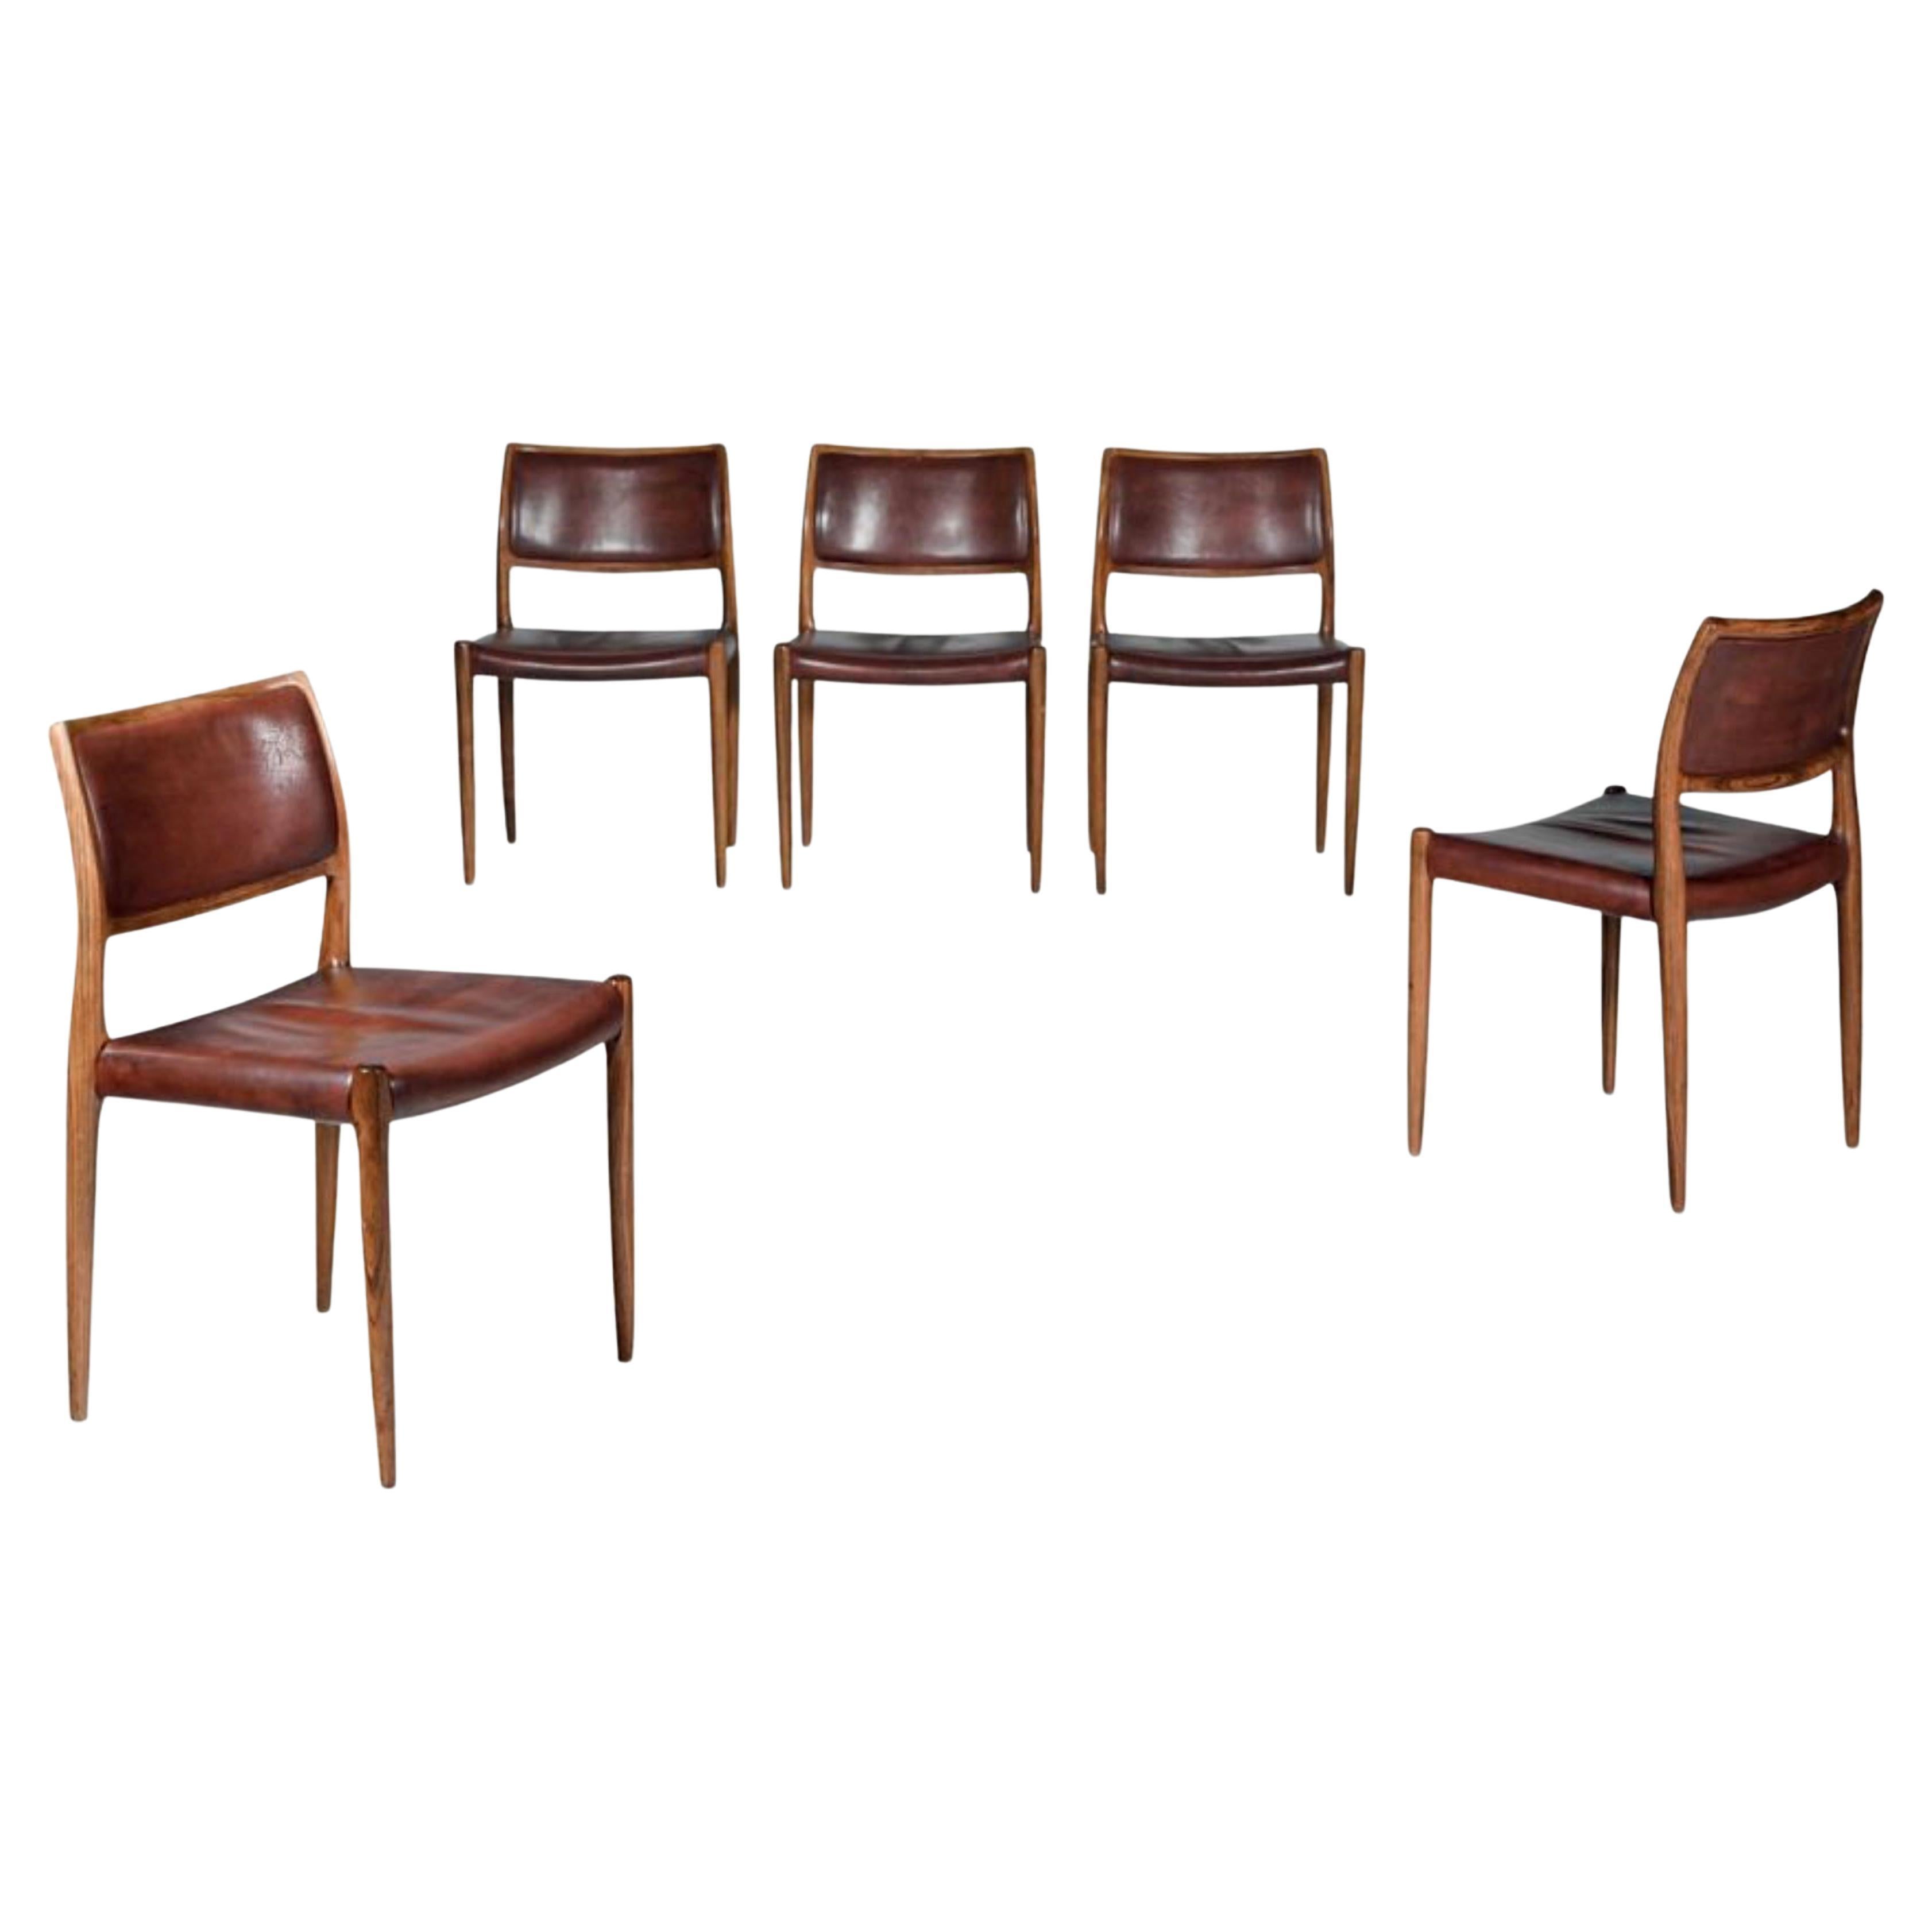 Niels Otto Moller Rosewood Armchair Mod N° 80 Set of 5 available